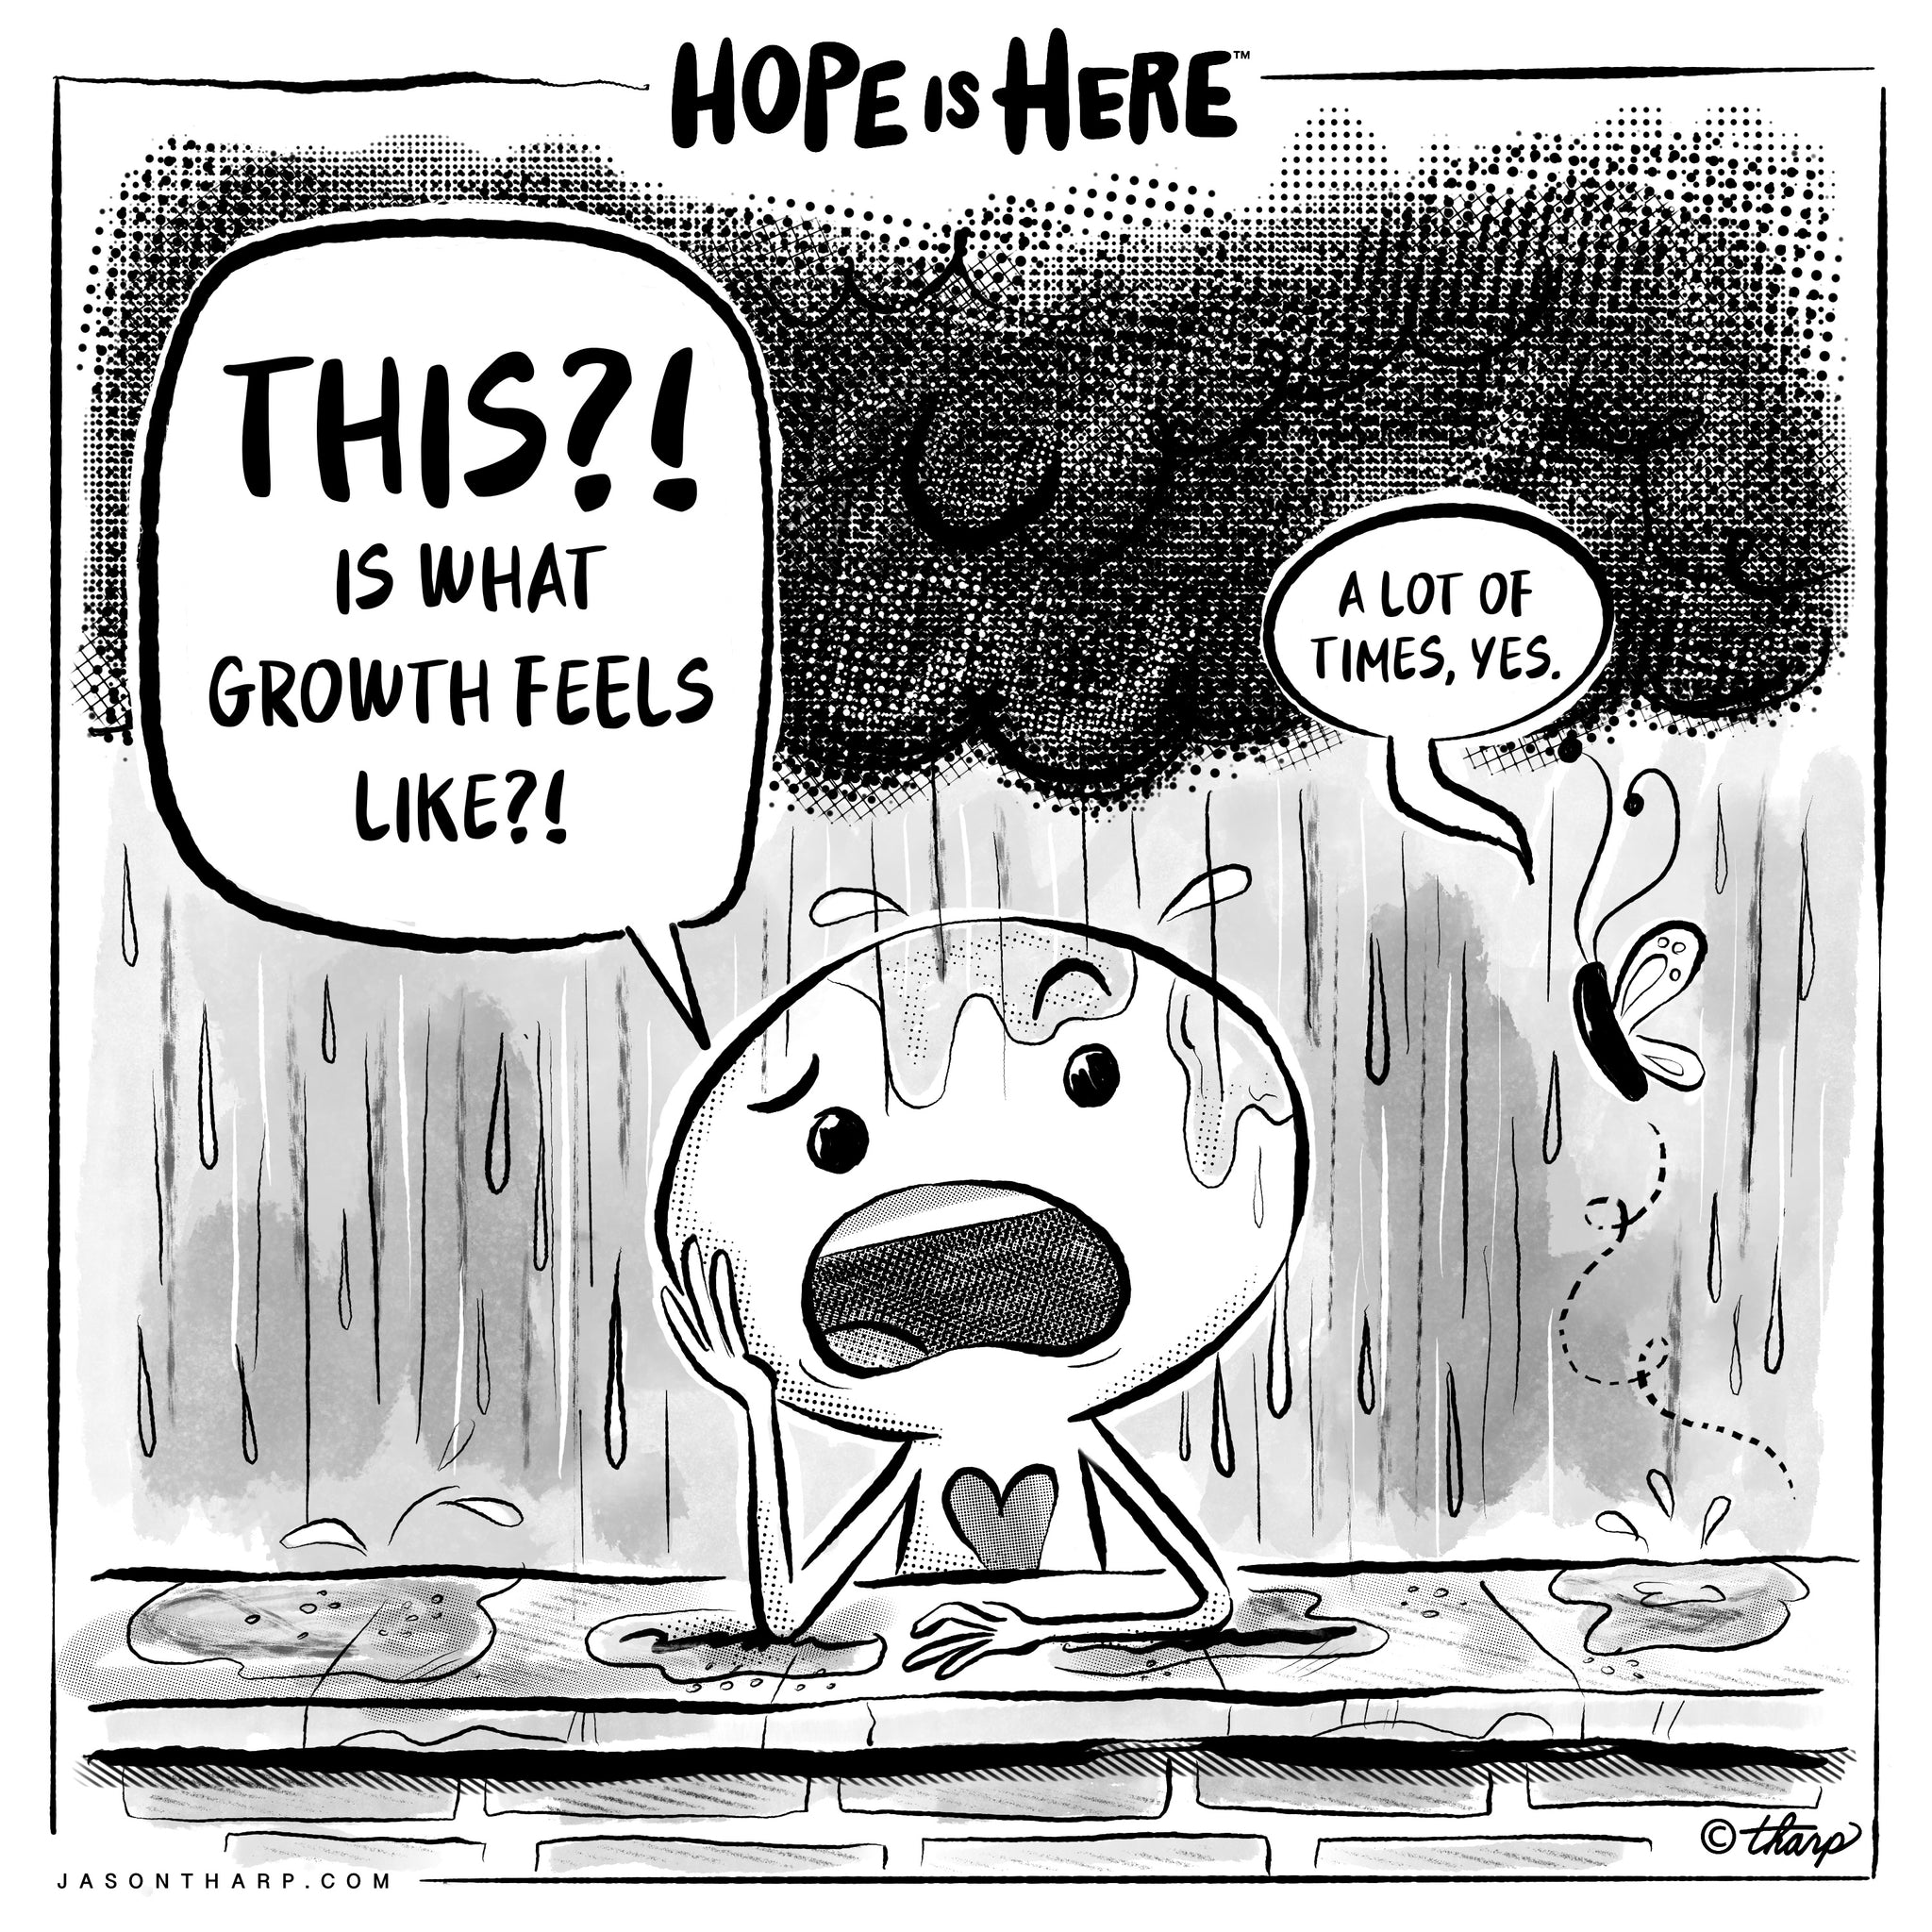 Beyond Hope Project, Hope is Here comic, growth comes from the painful moments.